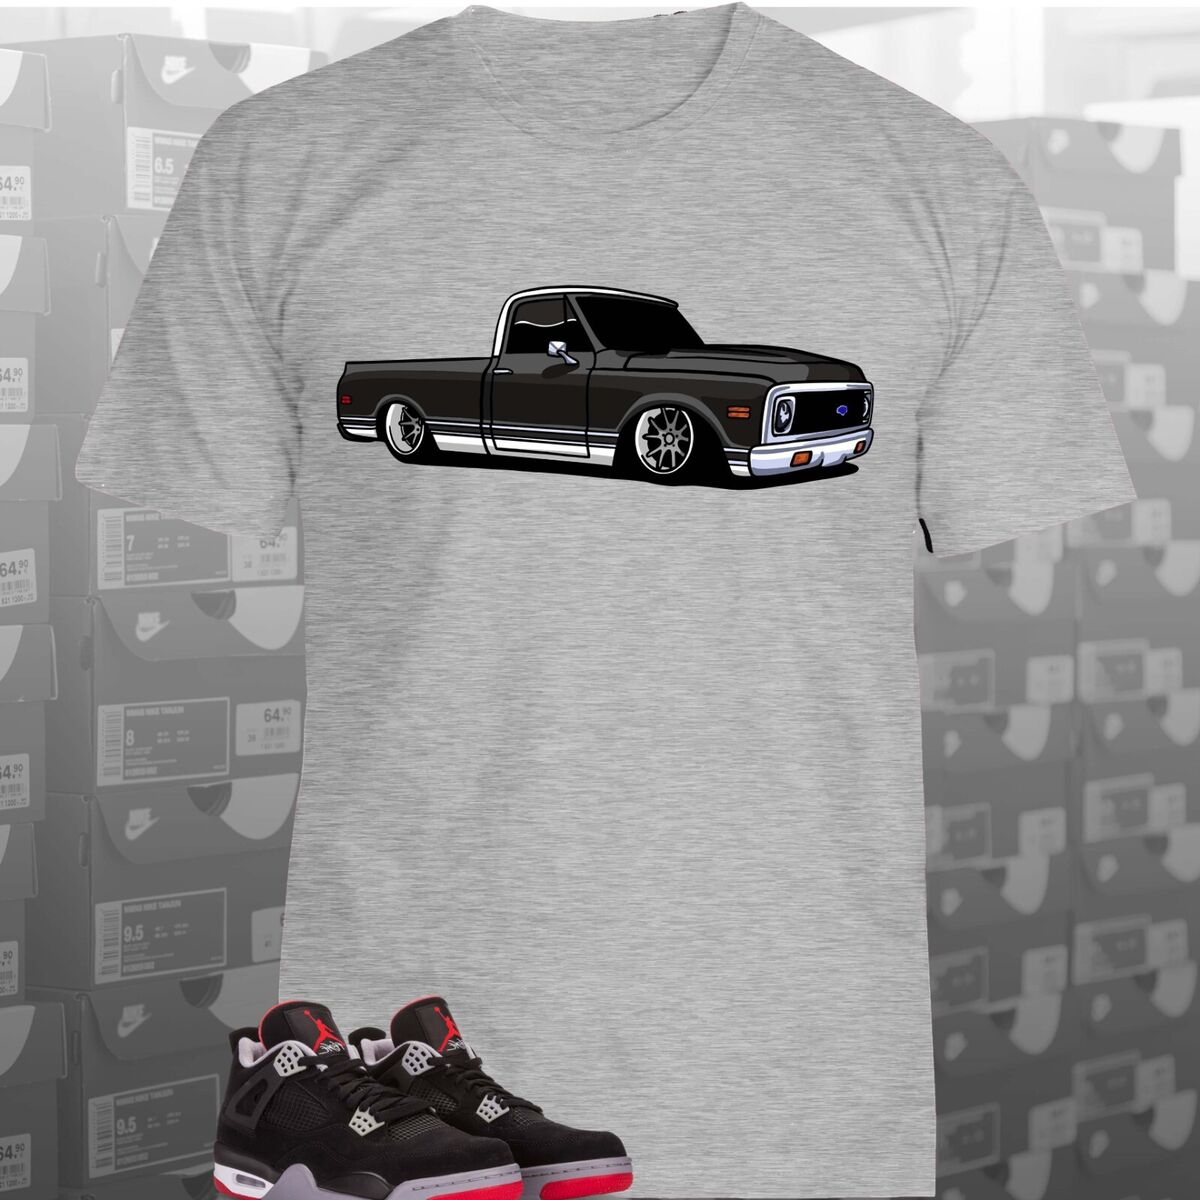 Awesome Sneaker Tee Shirt to Match Air Jordan Shoes, Black Chevy C10, Unisex Sizing on eBay